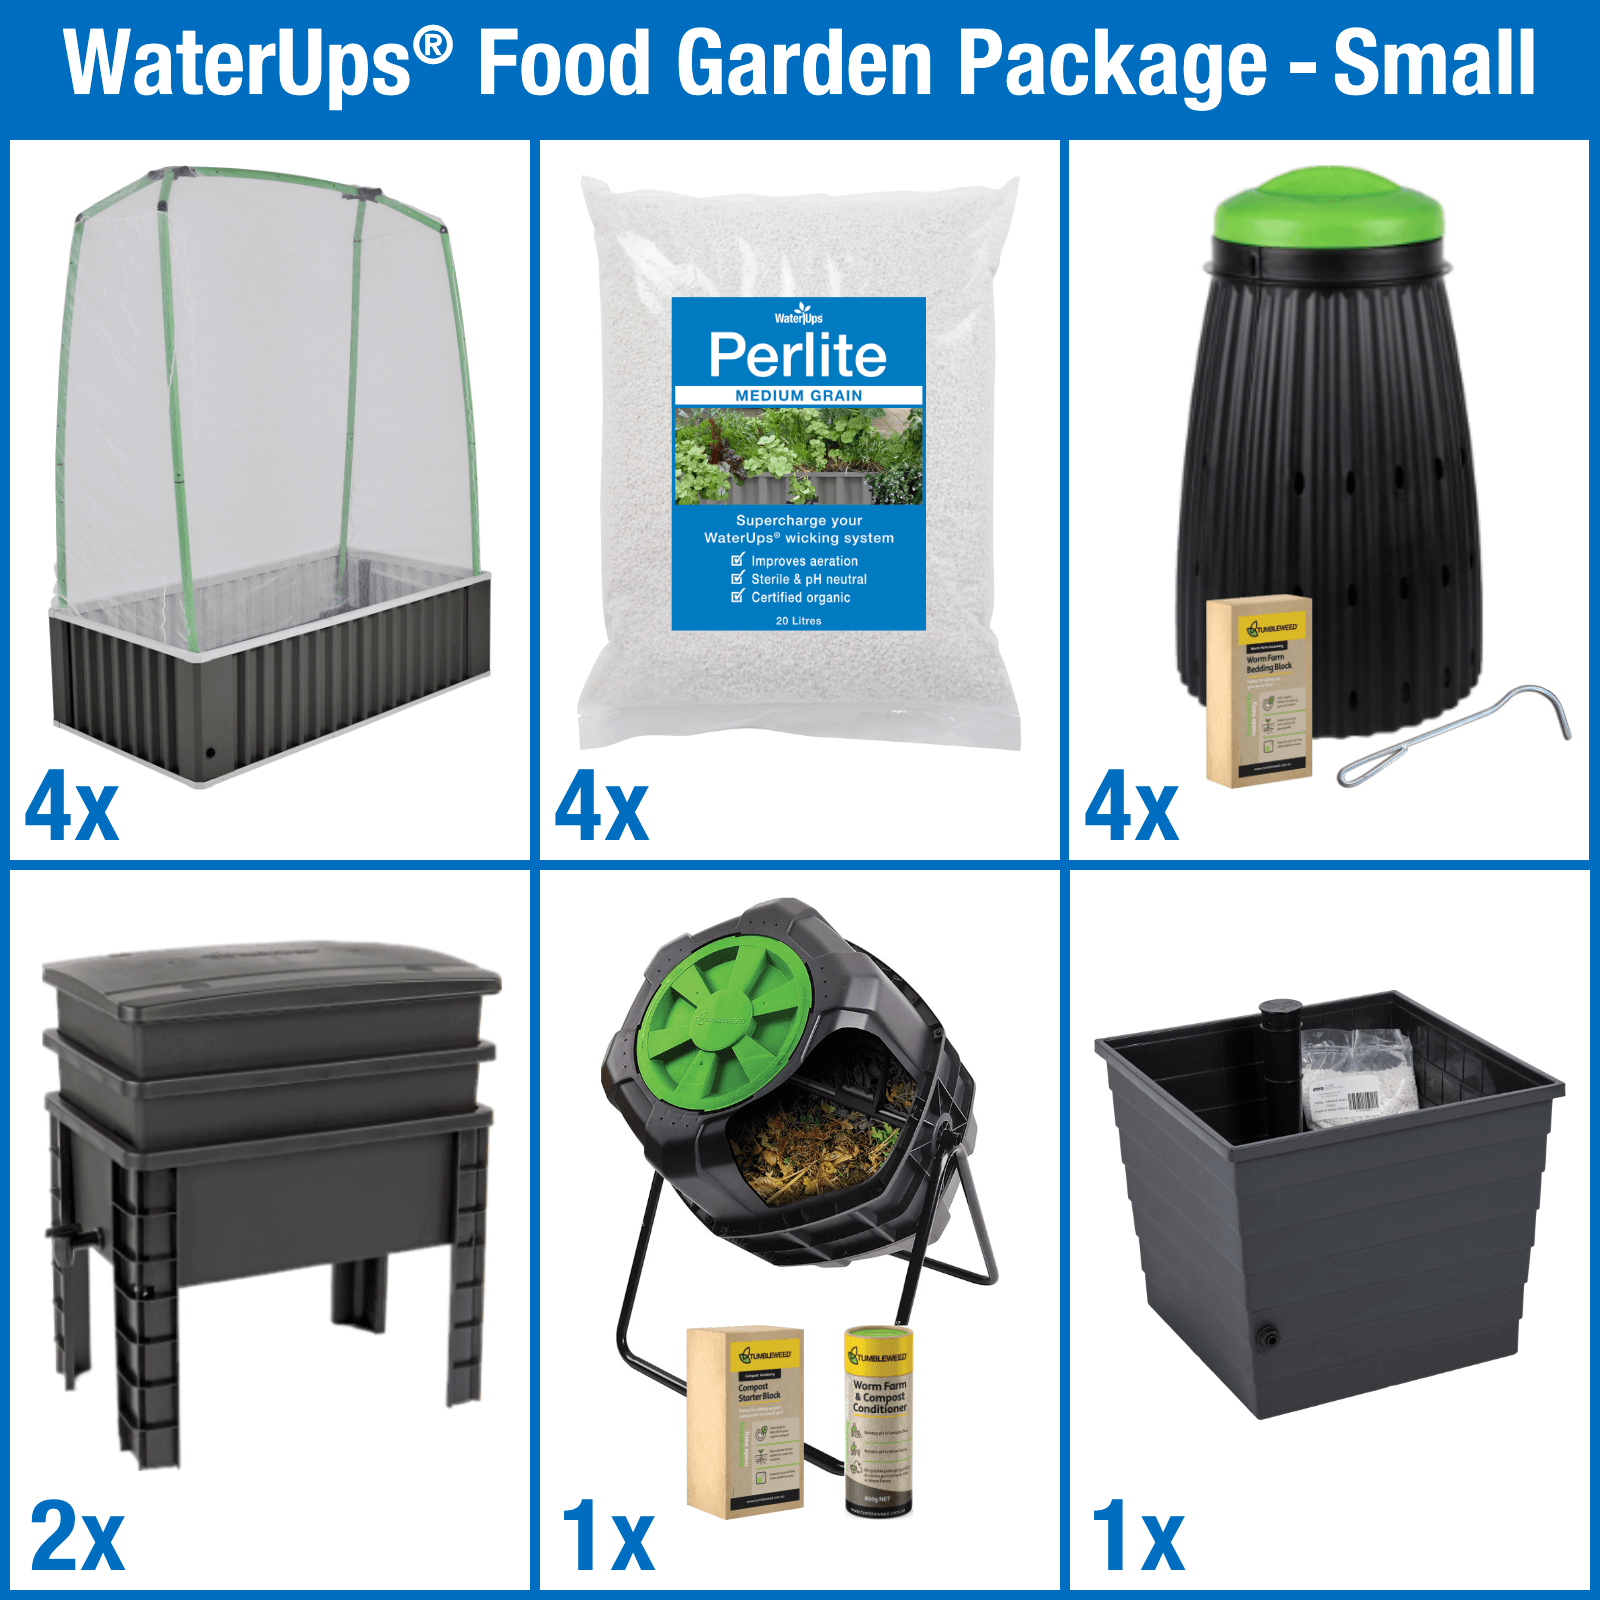 Sustainable food gardens are possible with WaterUps Food Garden Kits - ideal for home gardeners, hotel gardeners, school and community gardeners